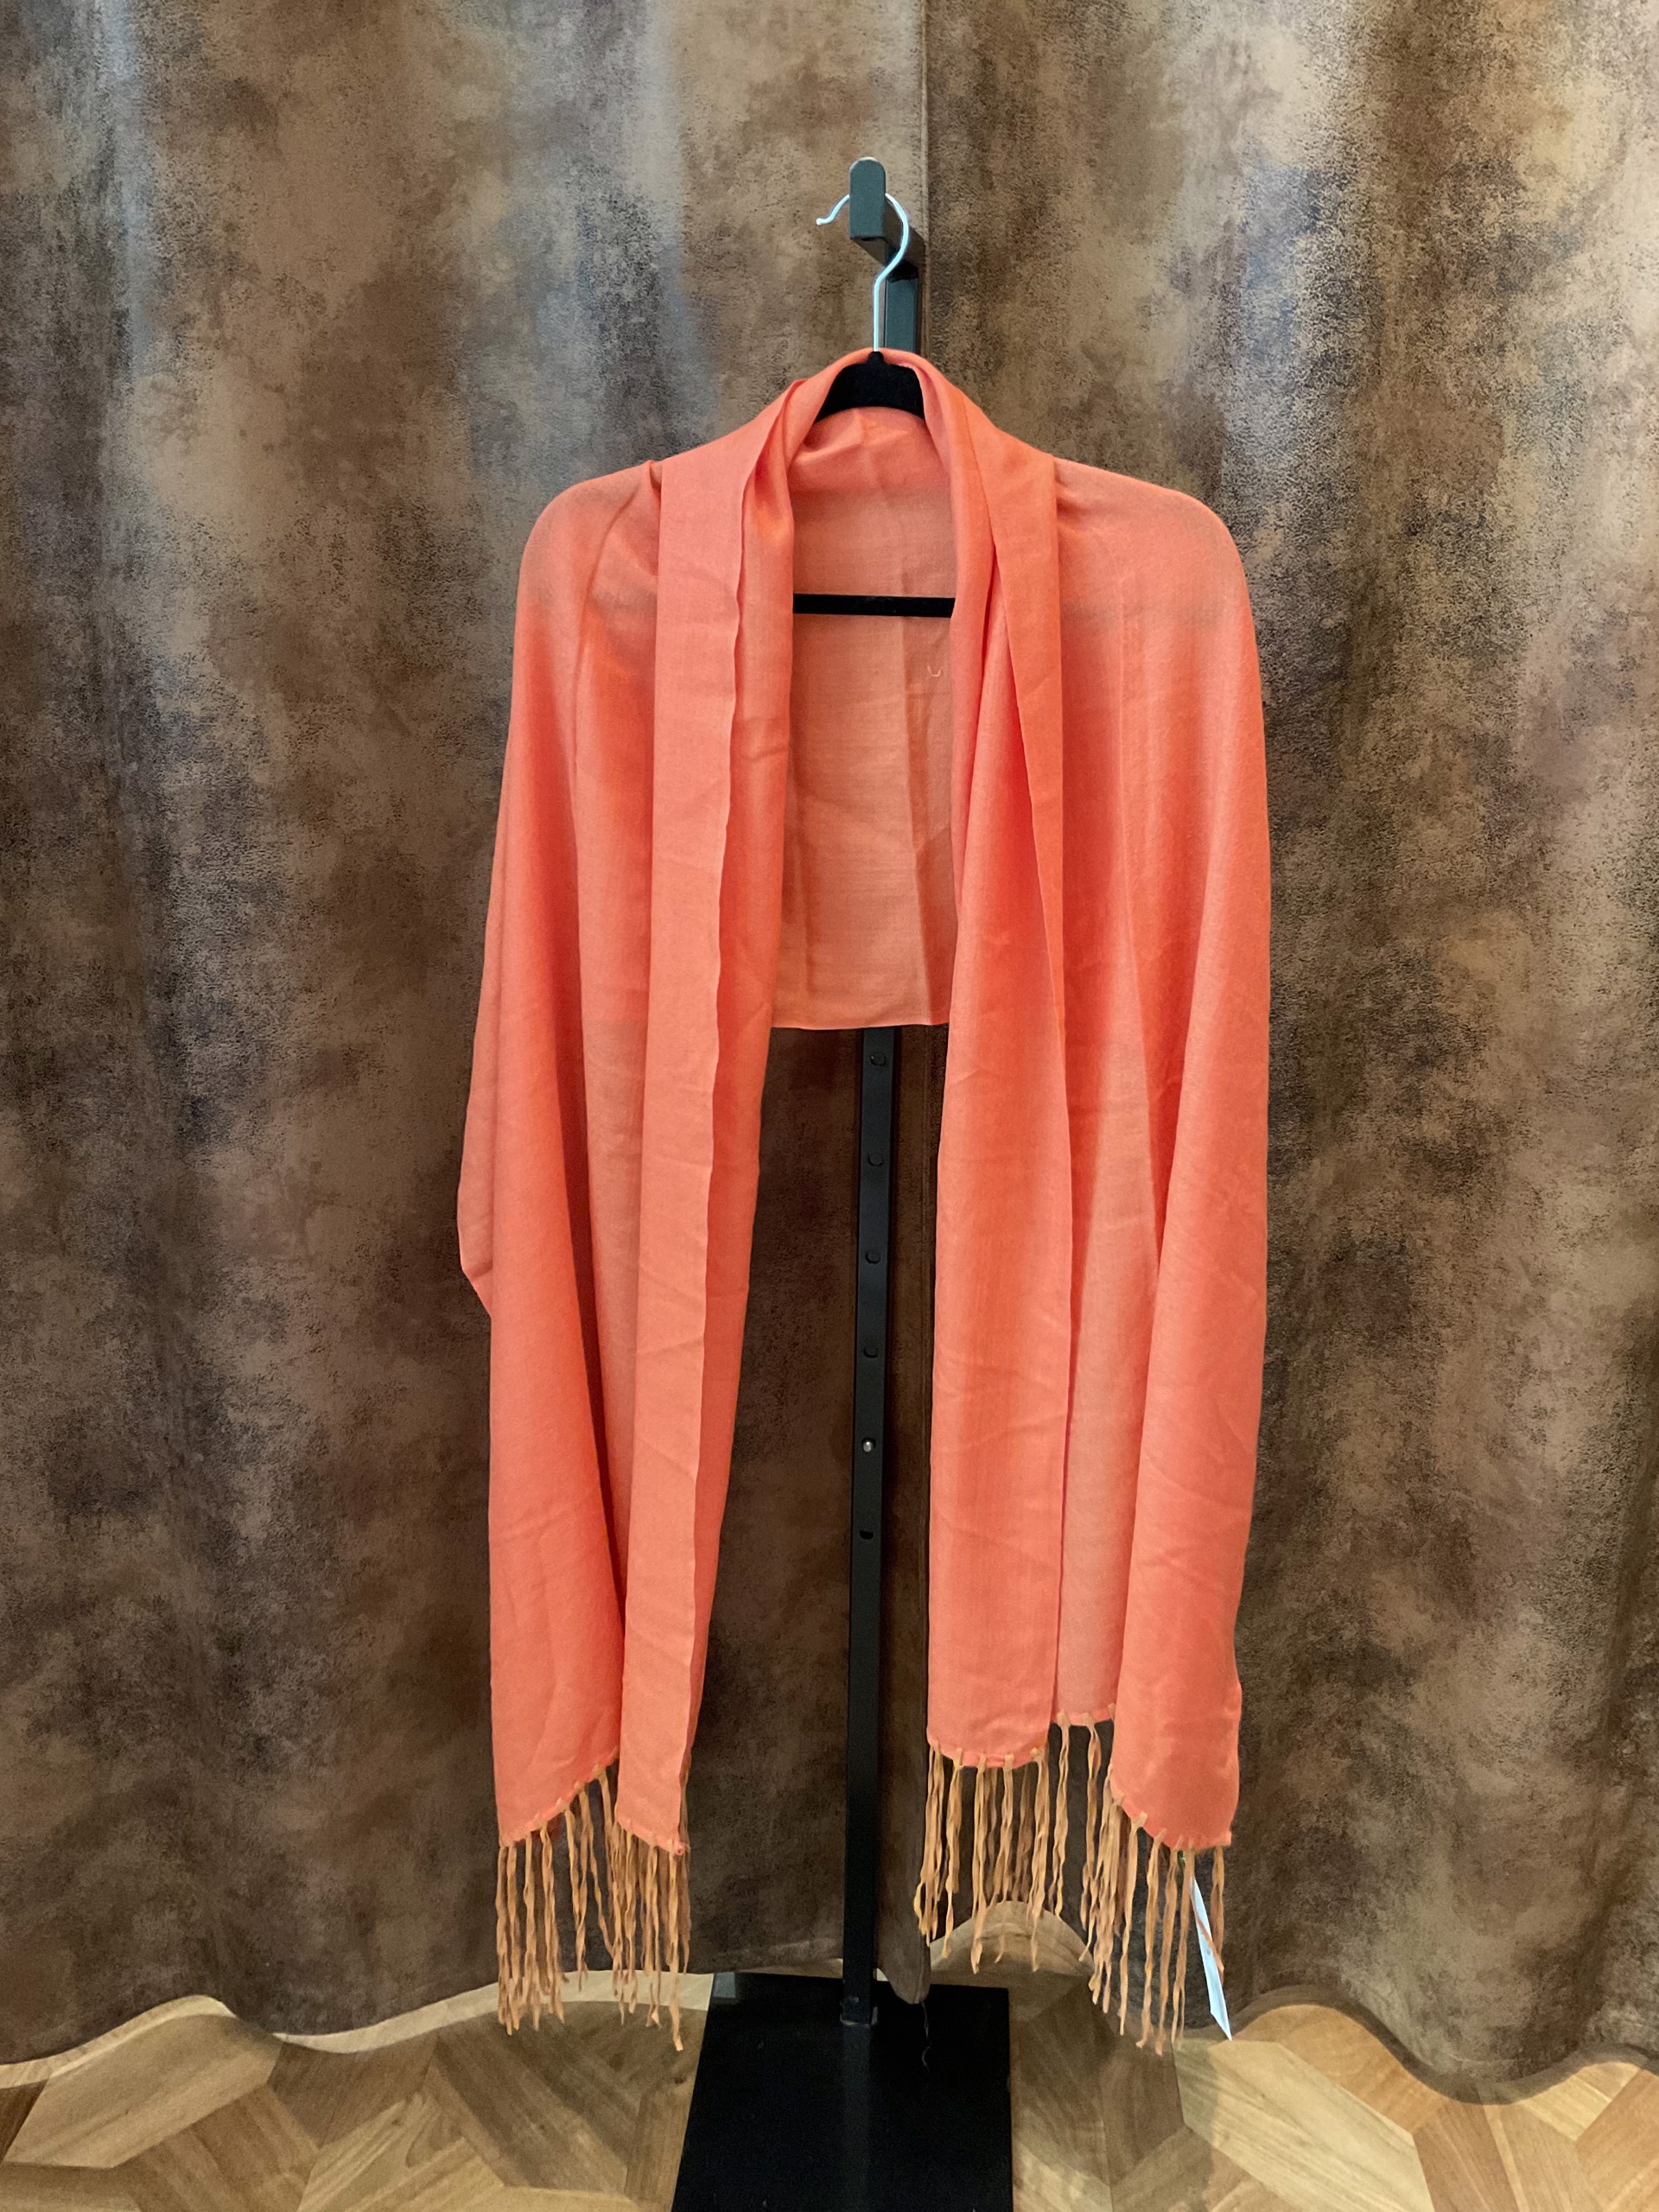 Suede Fringe Scarf by J. Catma